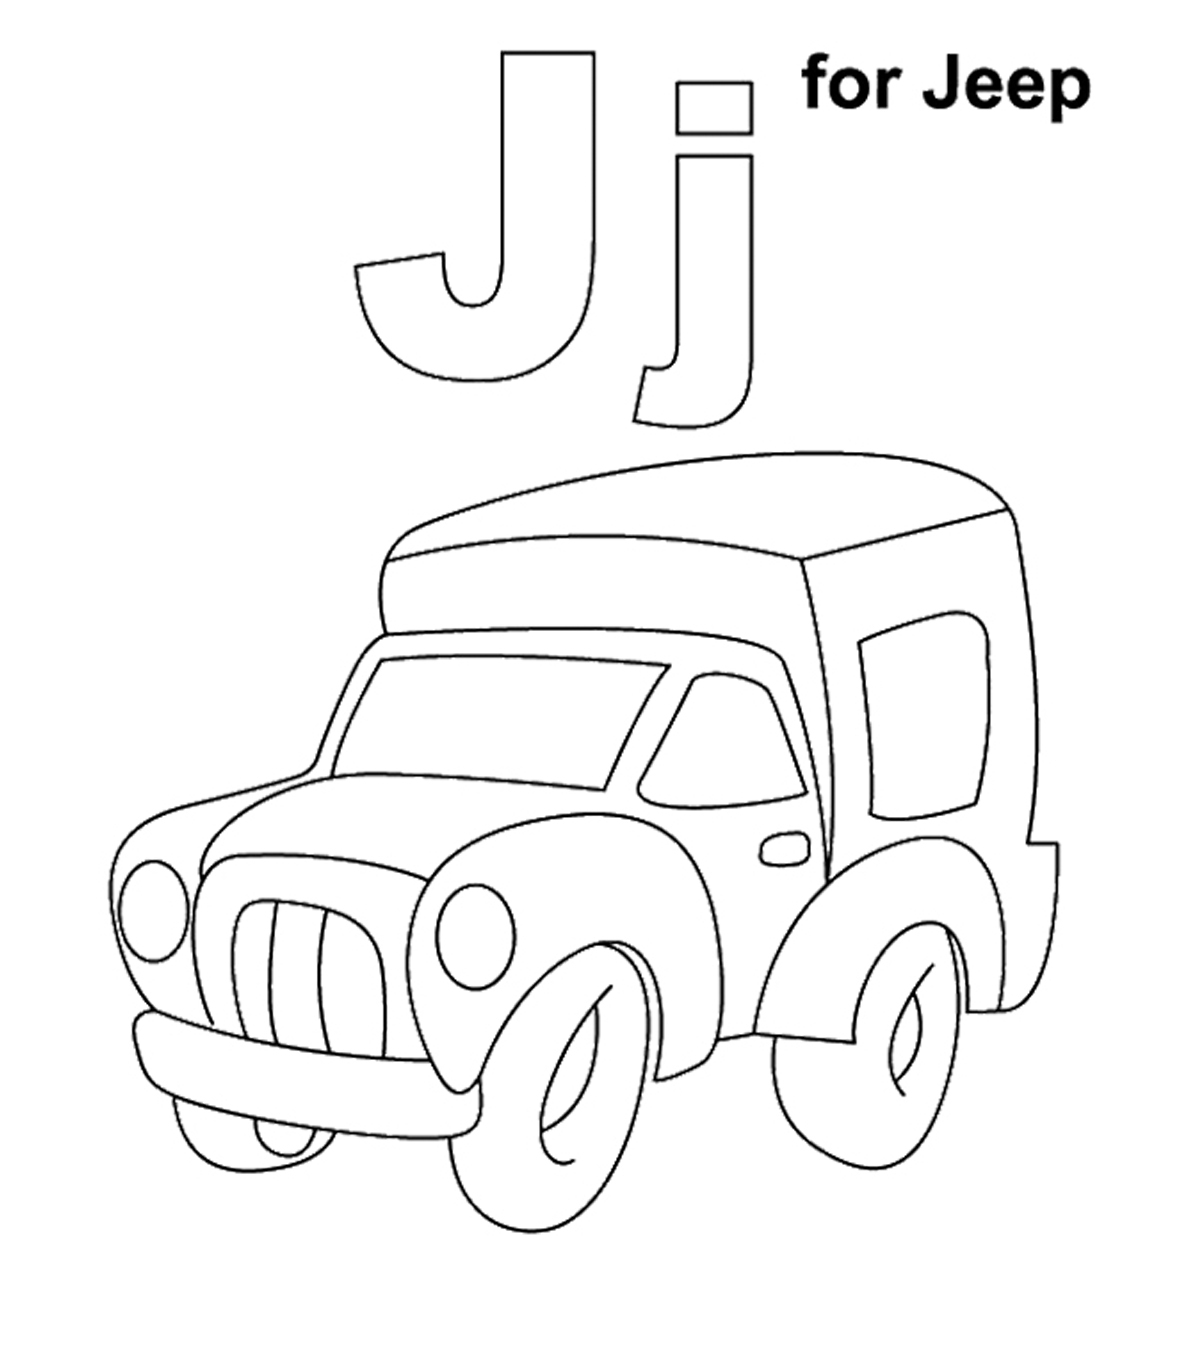 Top 10 Letter ‘J’ Coloring Pages Your Toddler Will Love To Learn & Color